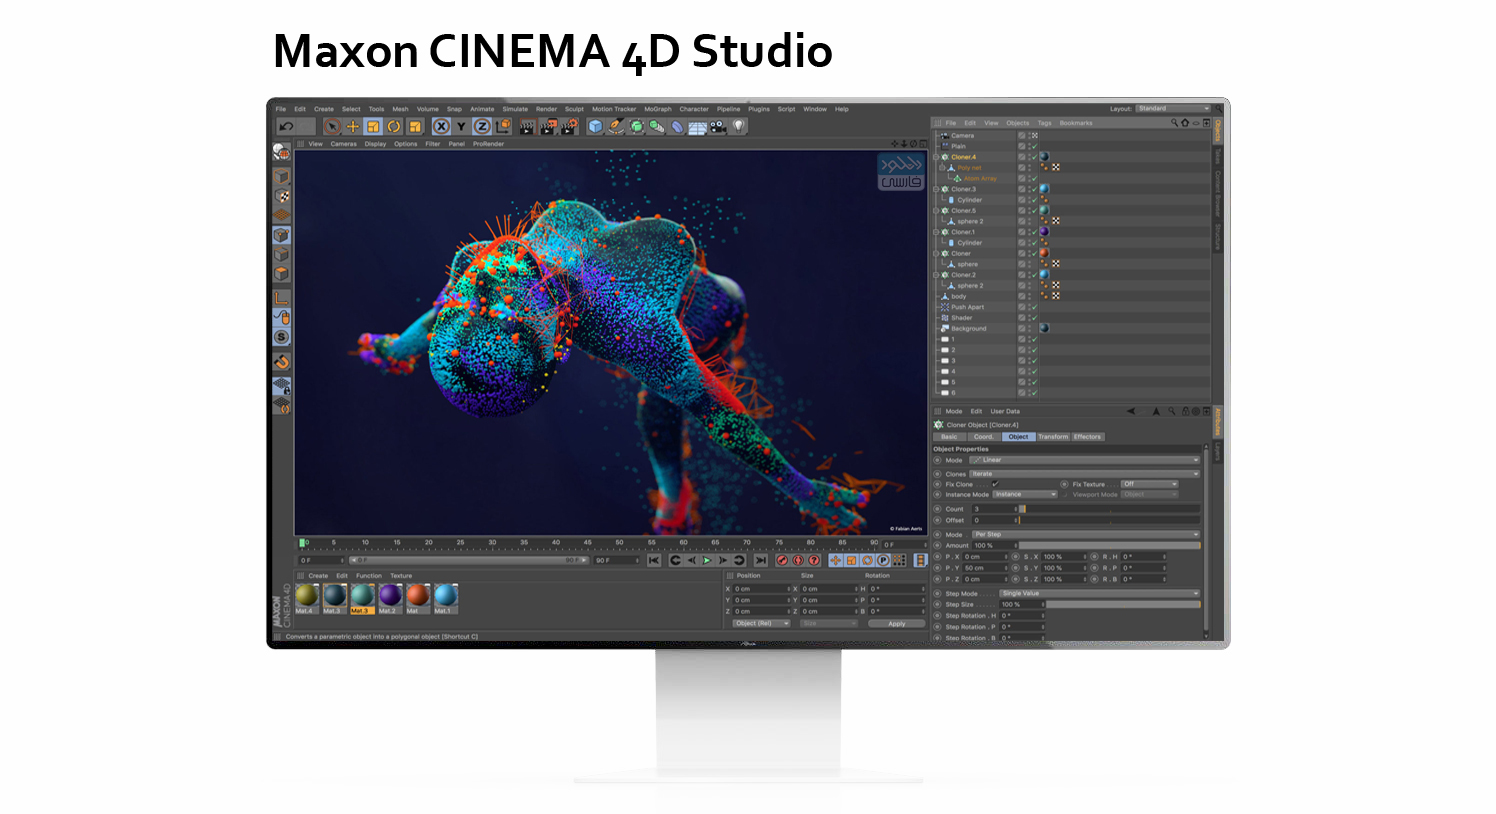 download the last version for android CINEMA 4D Studio R26.107 / 2023.2.2